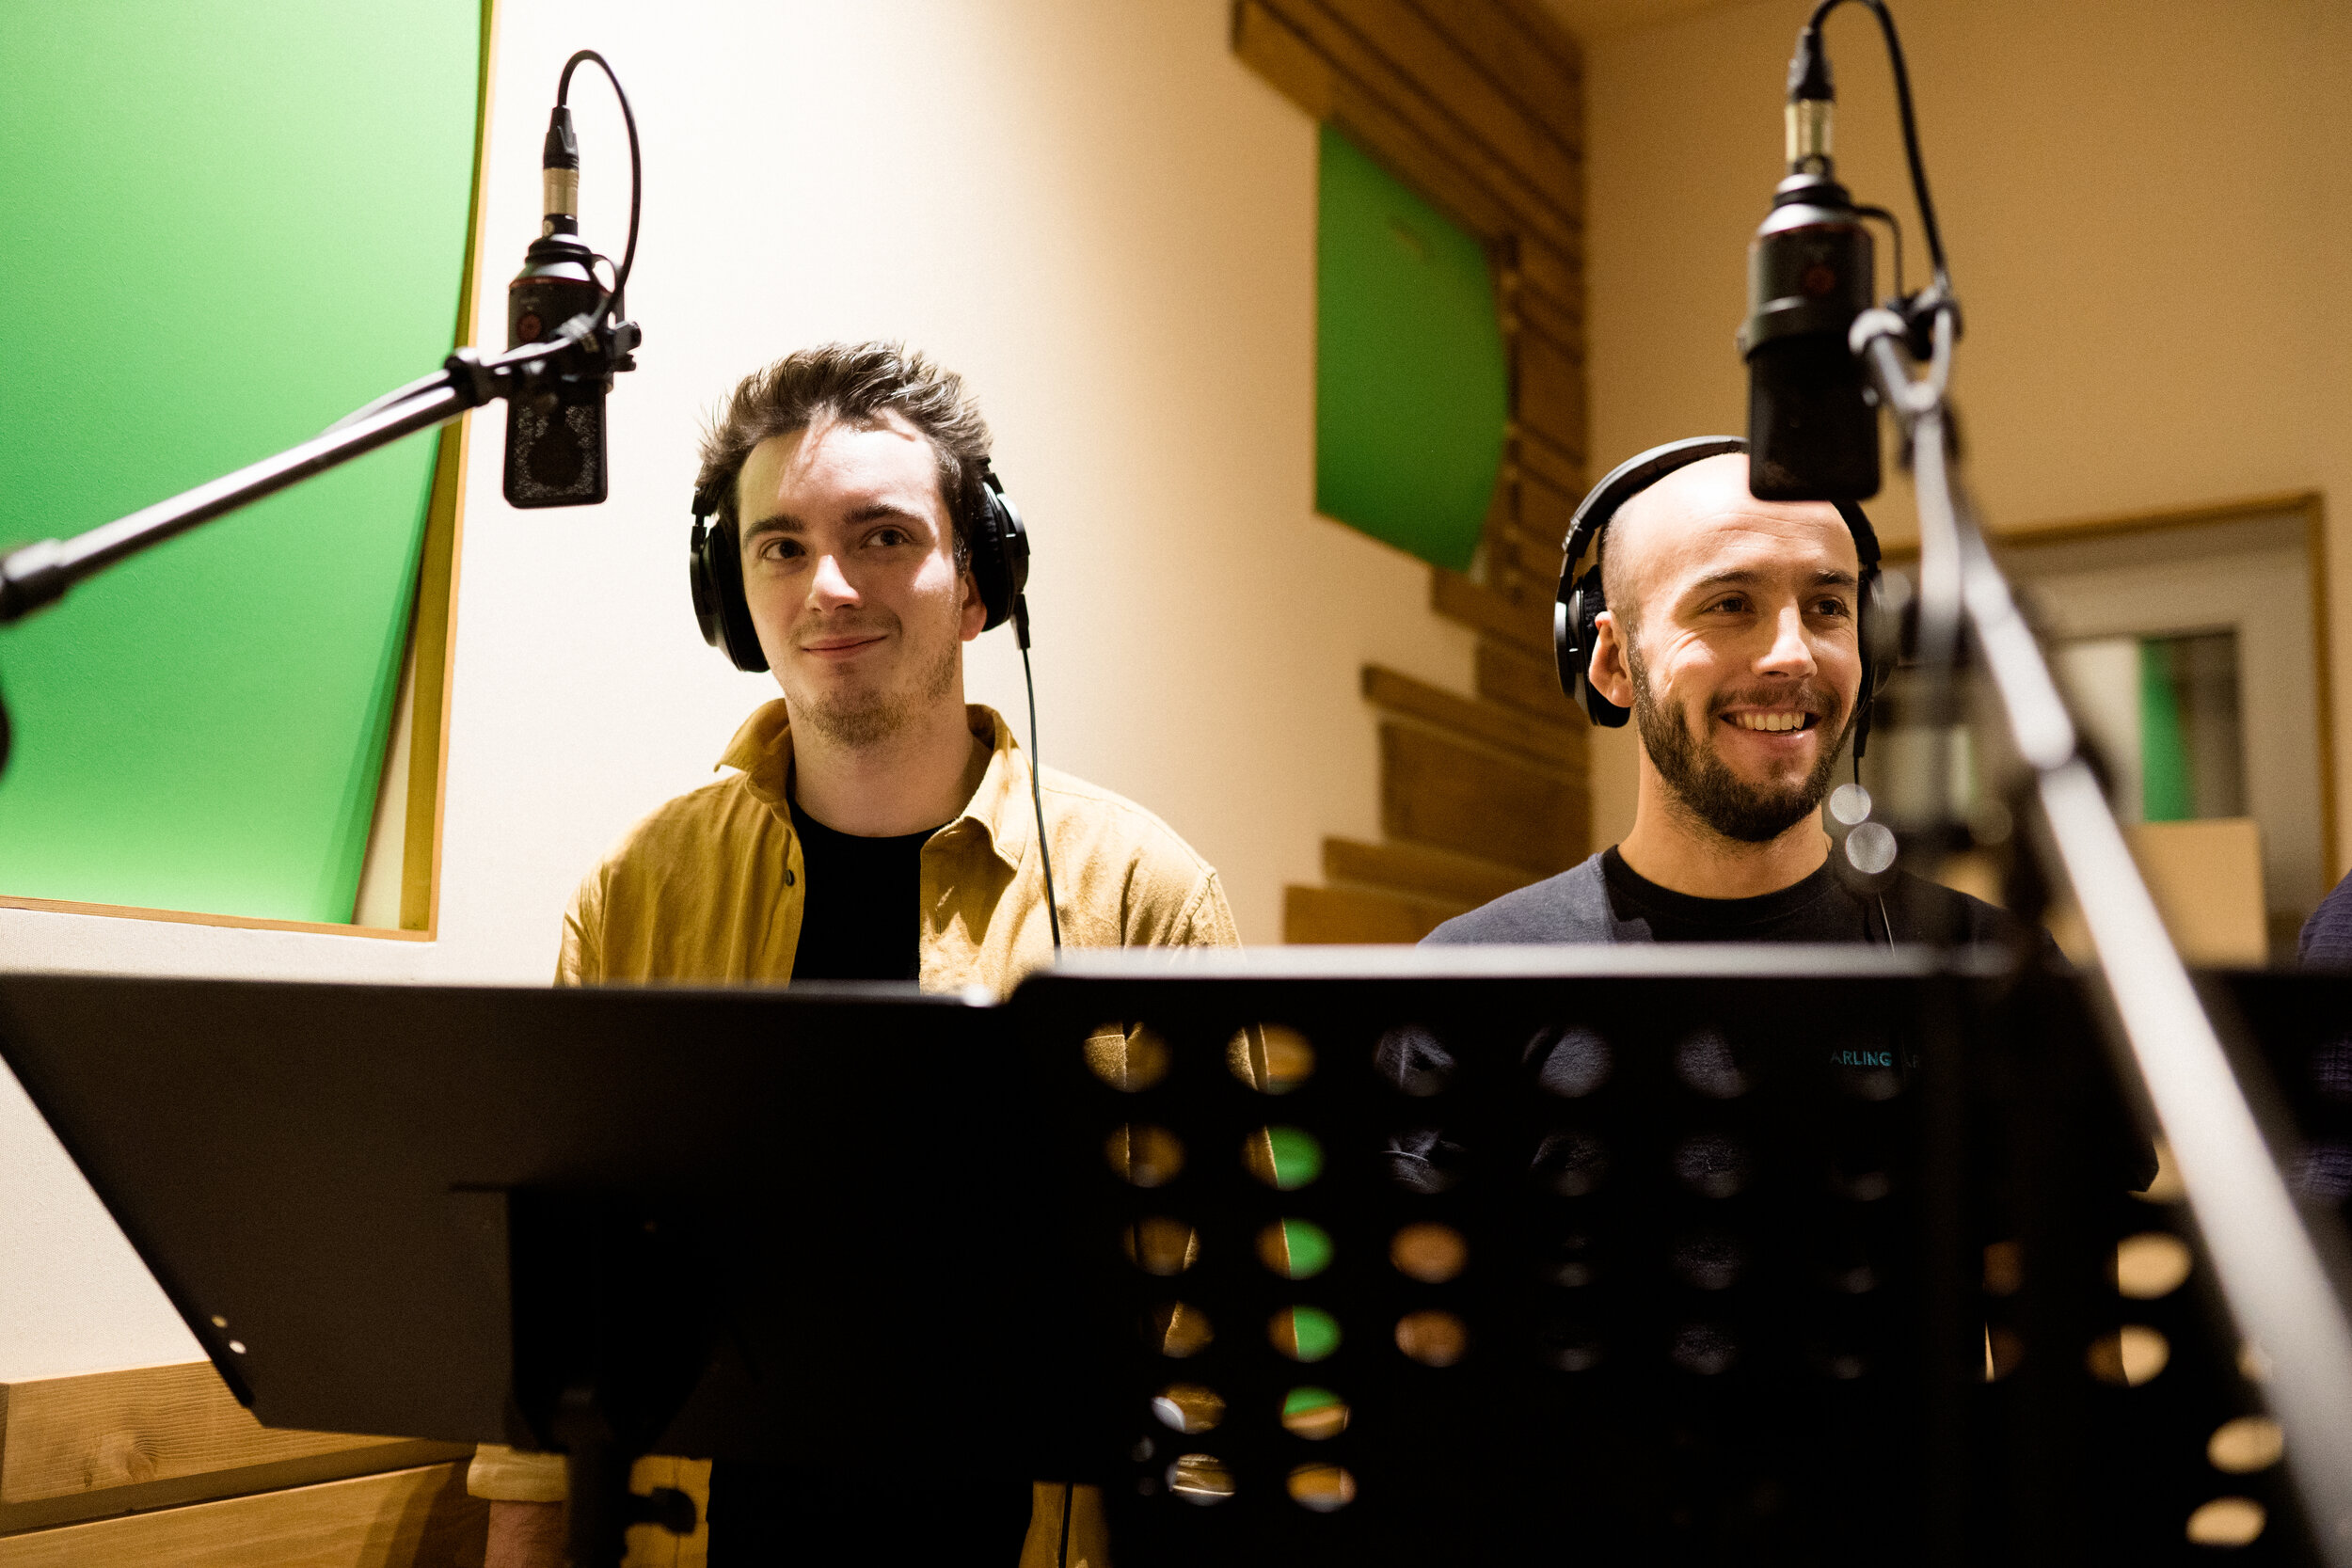 Male choir members in London record with Starling Arts. Photo by Florence Fox